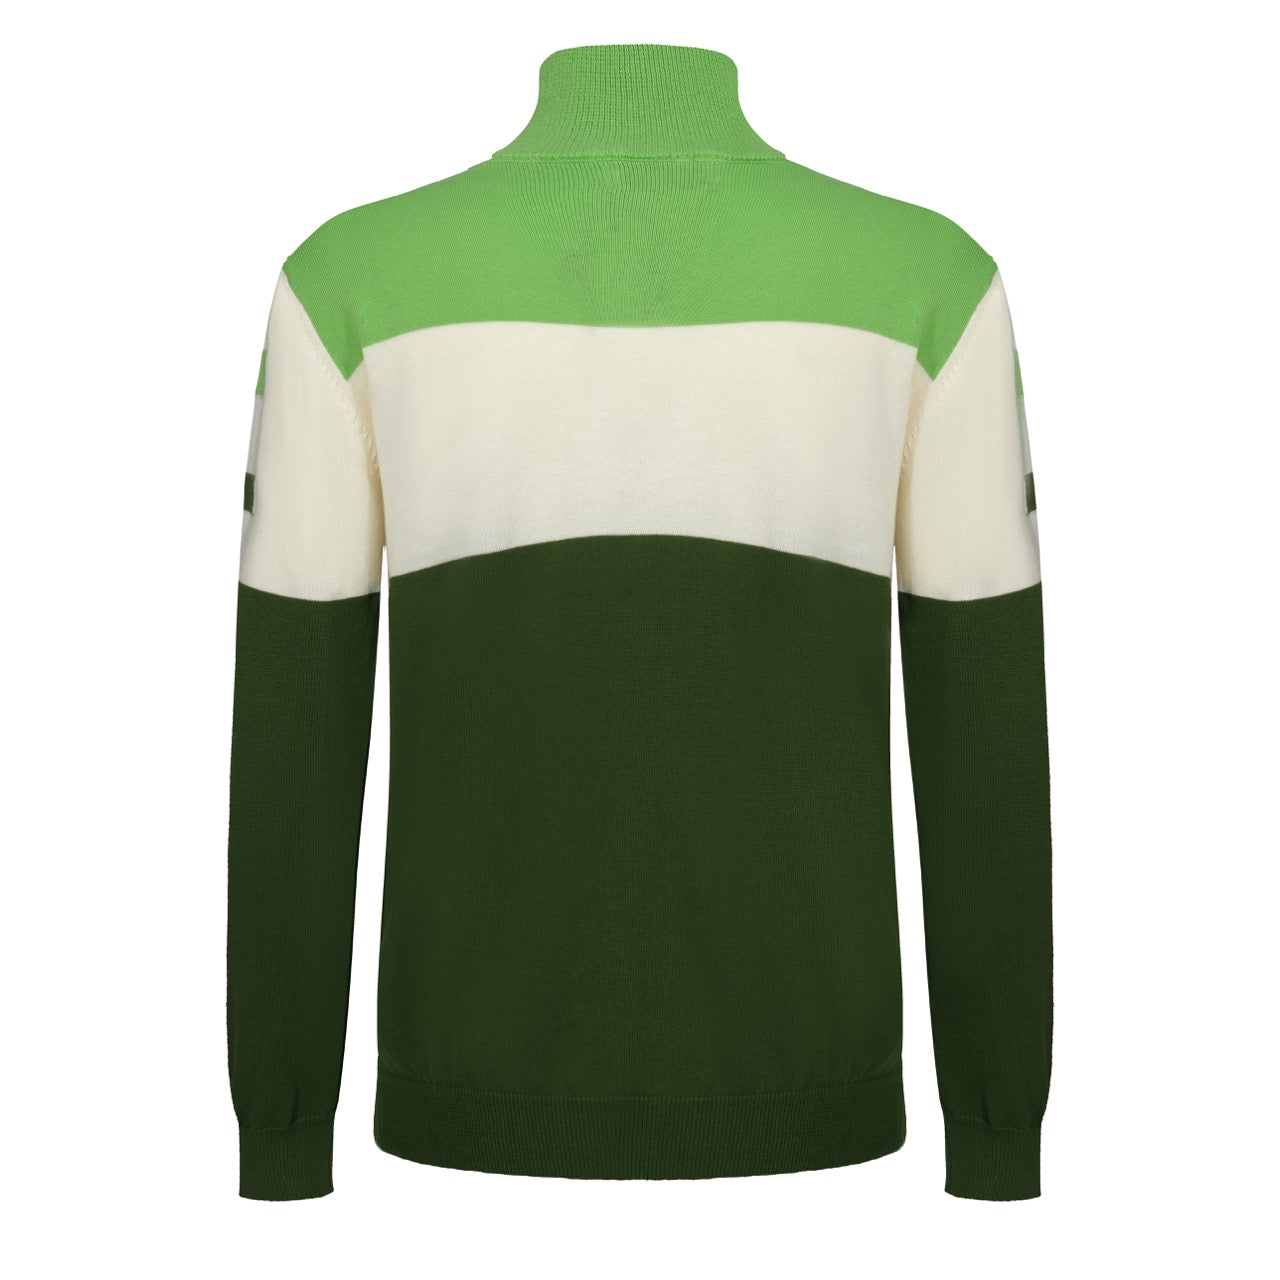 OXKNIT Men Vintage Clothing 1960s Mod Style Casual Long Sleeve Green Retro Racing Jumper